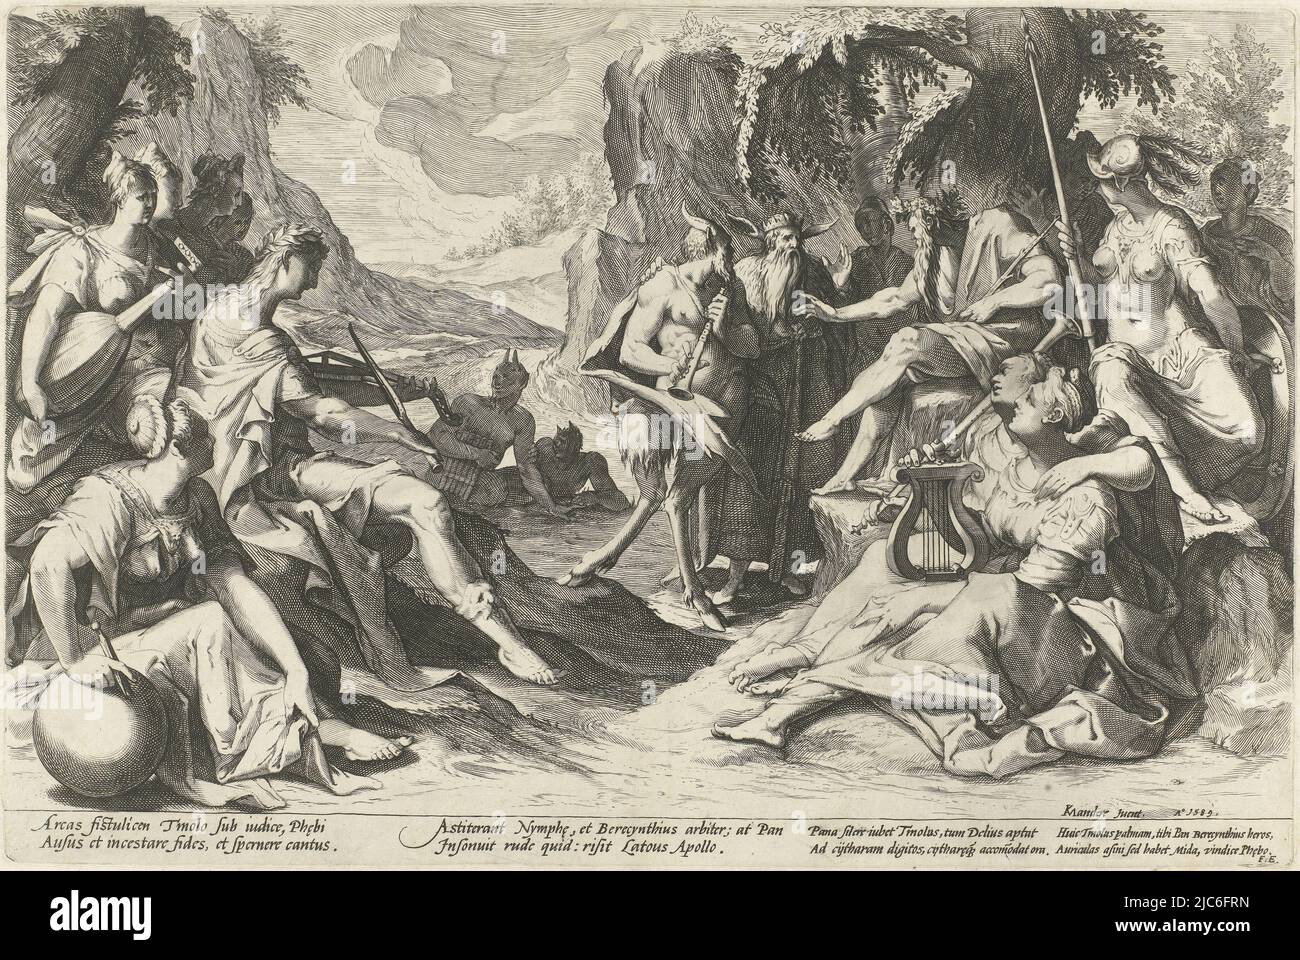 A music contest between Pan, in the center of the print, and Apollo, on the left under a tree. All the gods are gathered to watch the contest. The mountain god Tmolus, seated on a throne must pass judgment. He prefers Apollo's lyre to Pan's flute. King Midas, standing next to Pan, however, protests. He is cursed by Apollo and must wear donkey ears for the rest of his life., Midas Judgment, print maker: Nicolaes Jansz. Clock, Karel van Mander (I), (mentioned on object), Franco Estius, Haarlem, 1589, paper, engraving, h 250 mm × w 400 mm Stock Photo